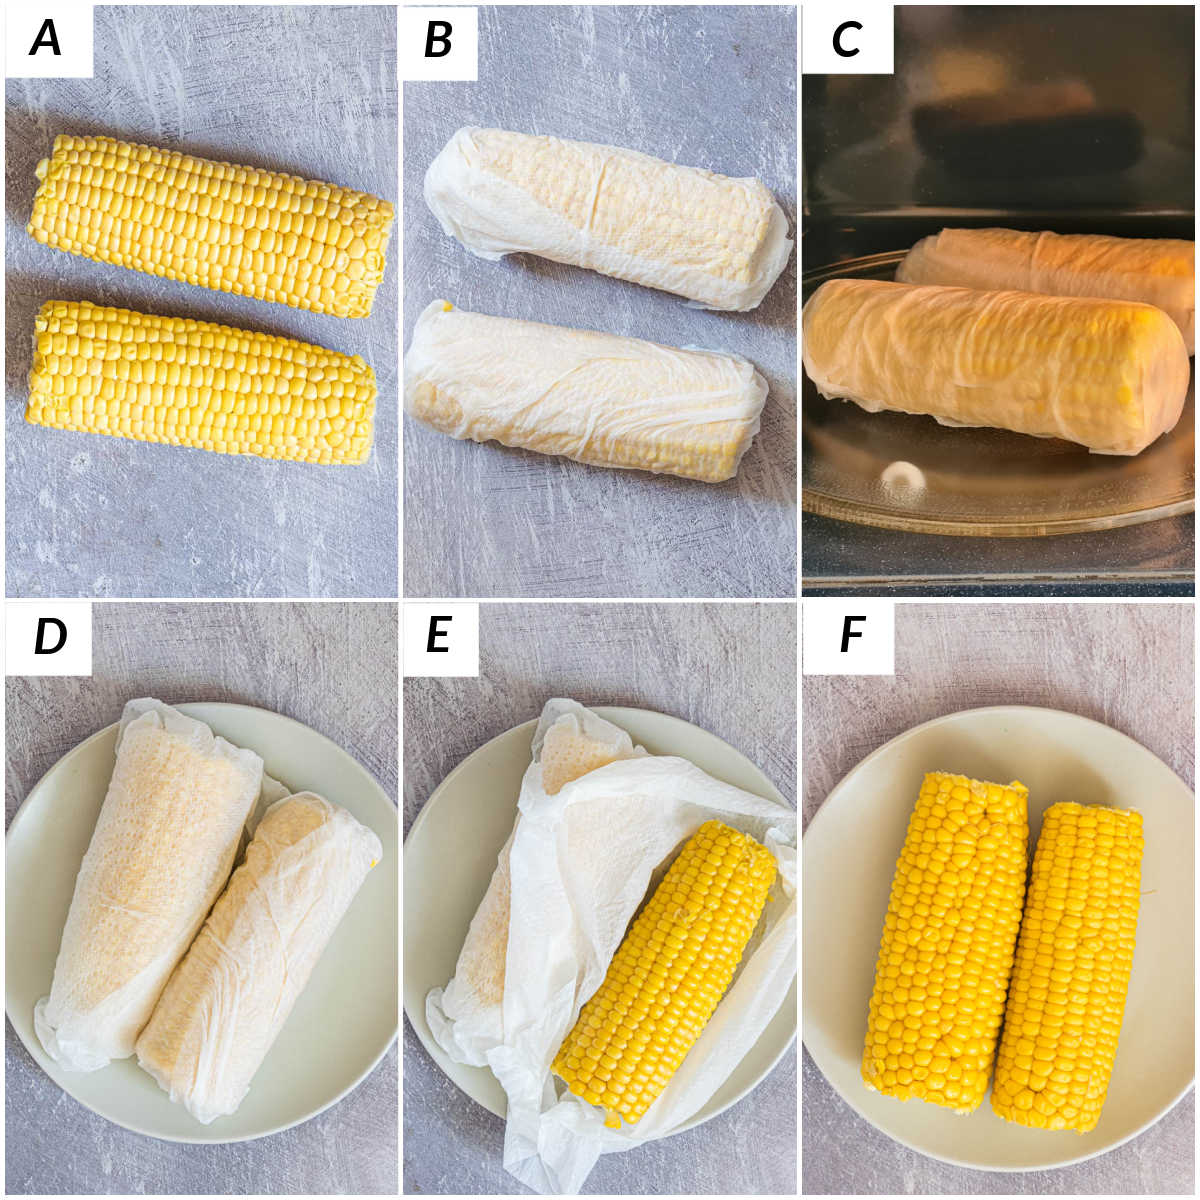 Image collage showing the steps to microwave corn on the cob